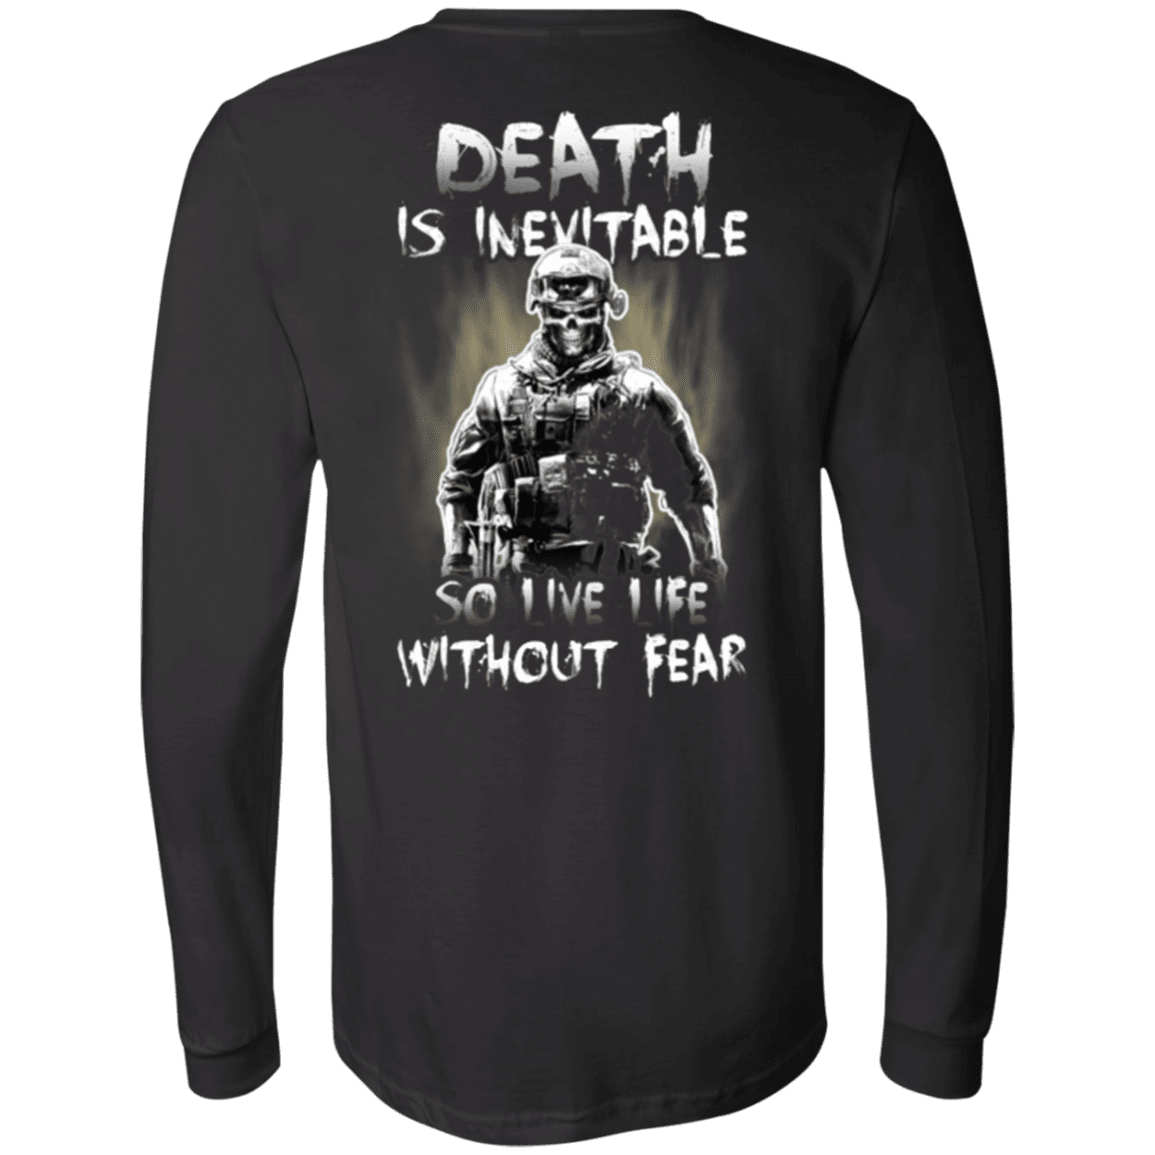 Military T-Shirt "Veteran - Death is Inevitable so I Have Life Without Fear" - Men Back-TShirt-General-Veterans Nation